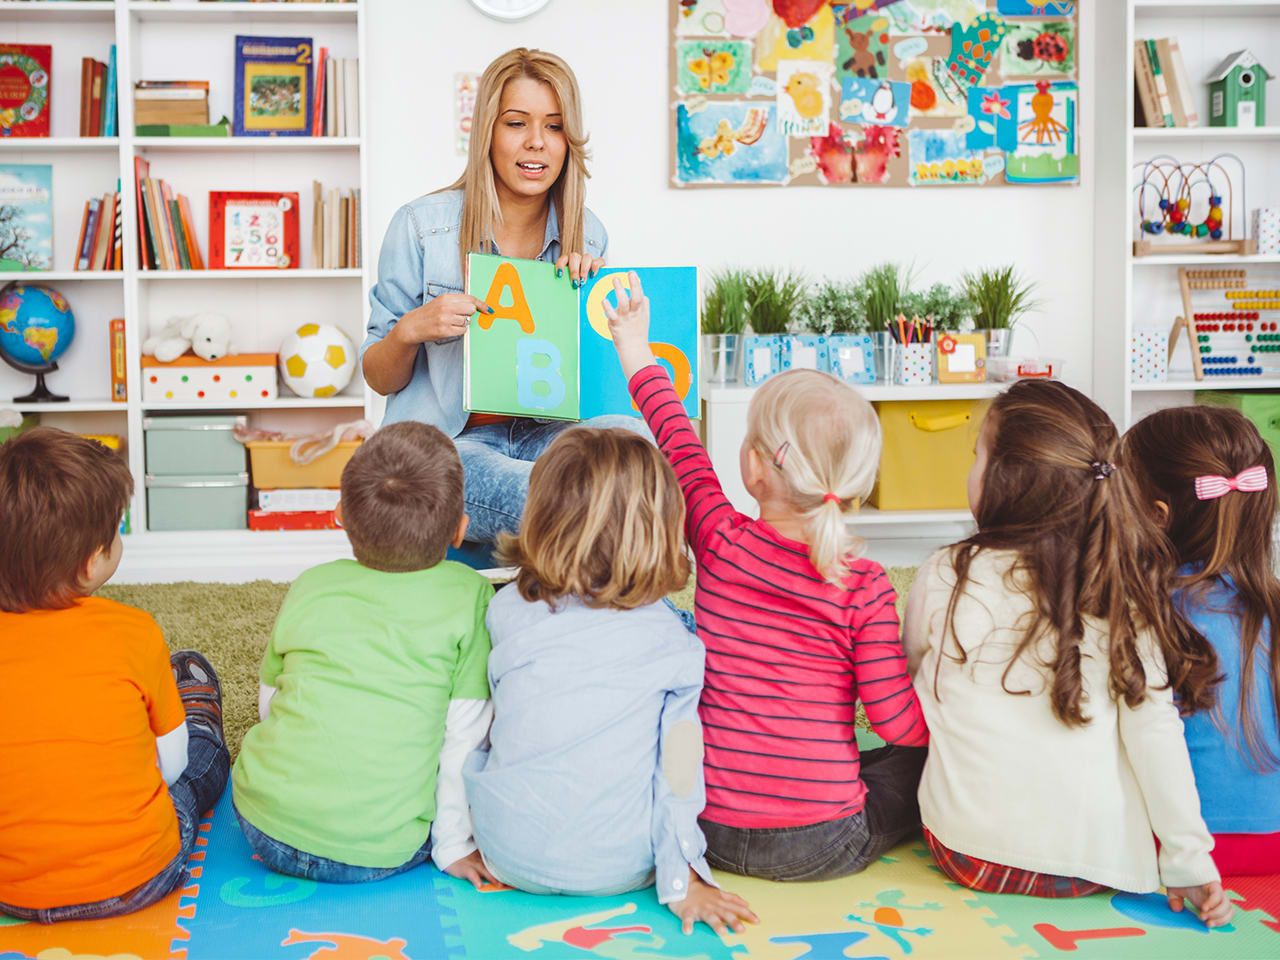 8 ways to piss off your kid's daycare teacher